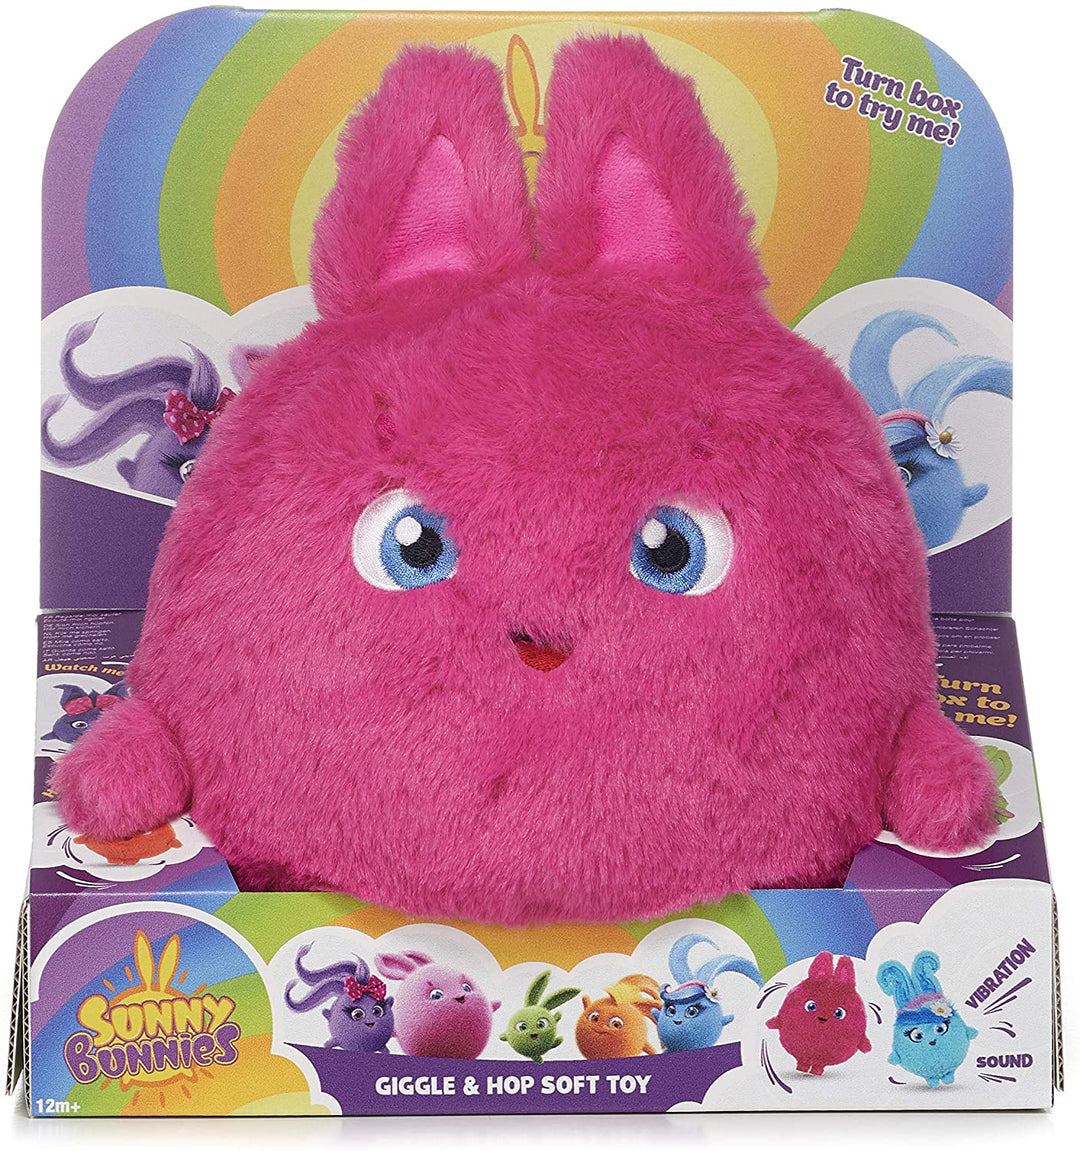 Posh Paws 37430 Sunny Bunnies Large Feature Big Boo Giggle &amp; Hop Soft Toy-25cm